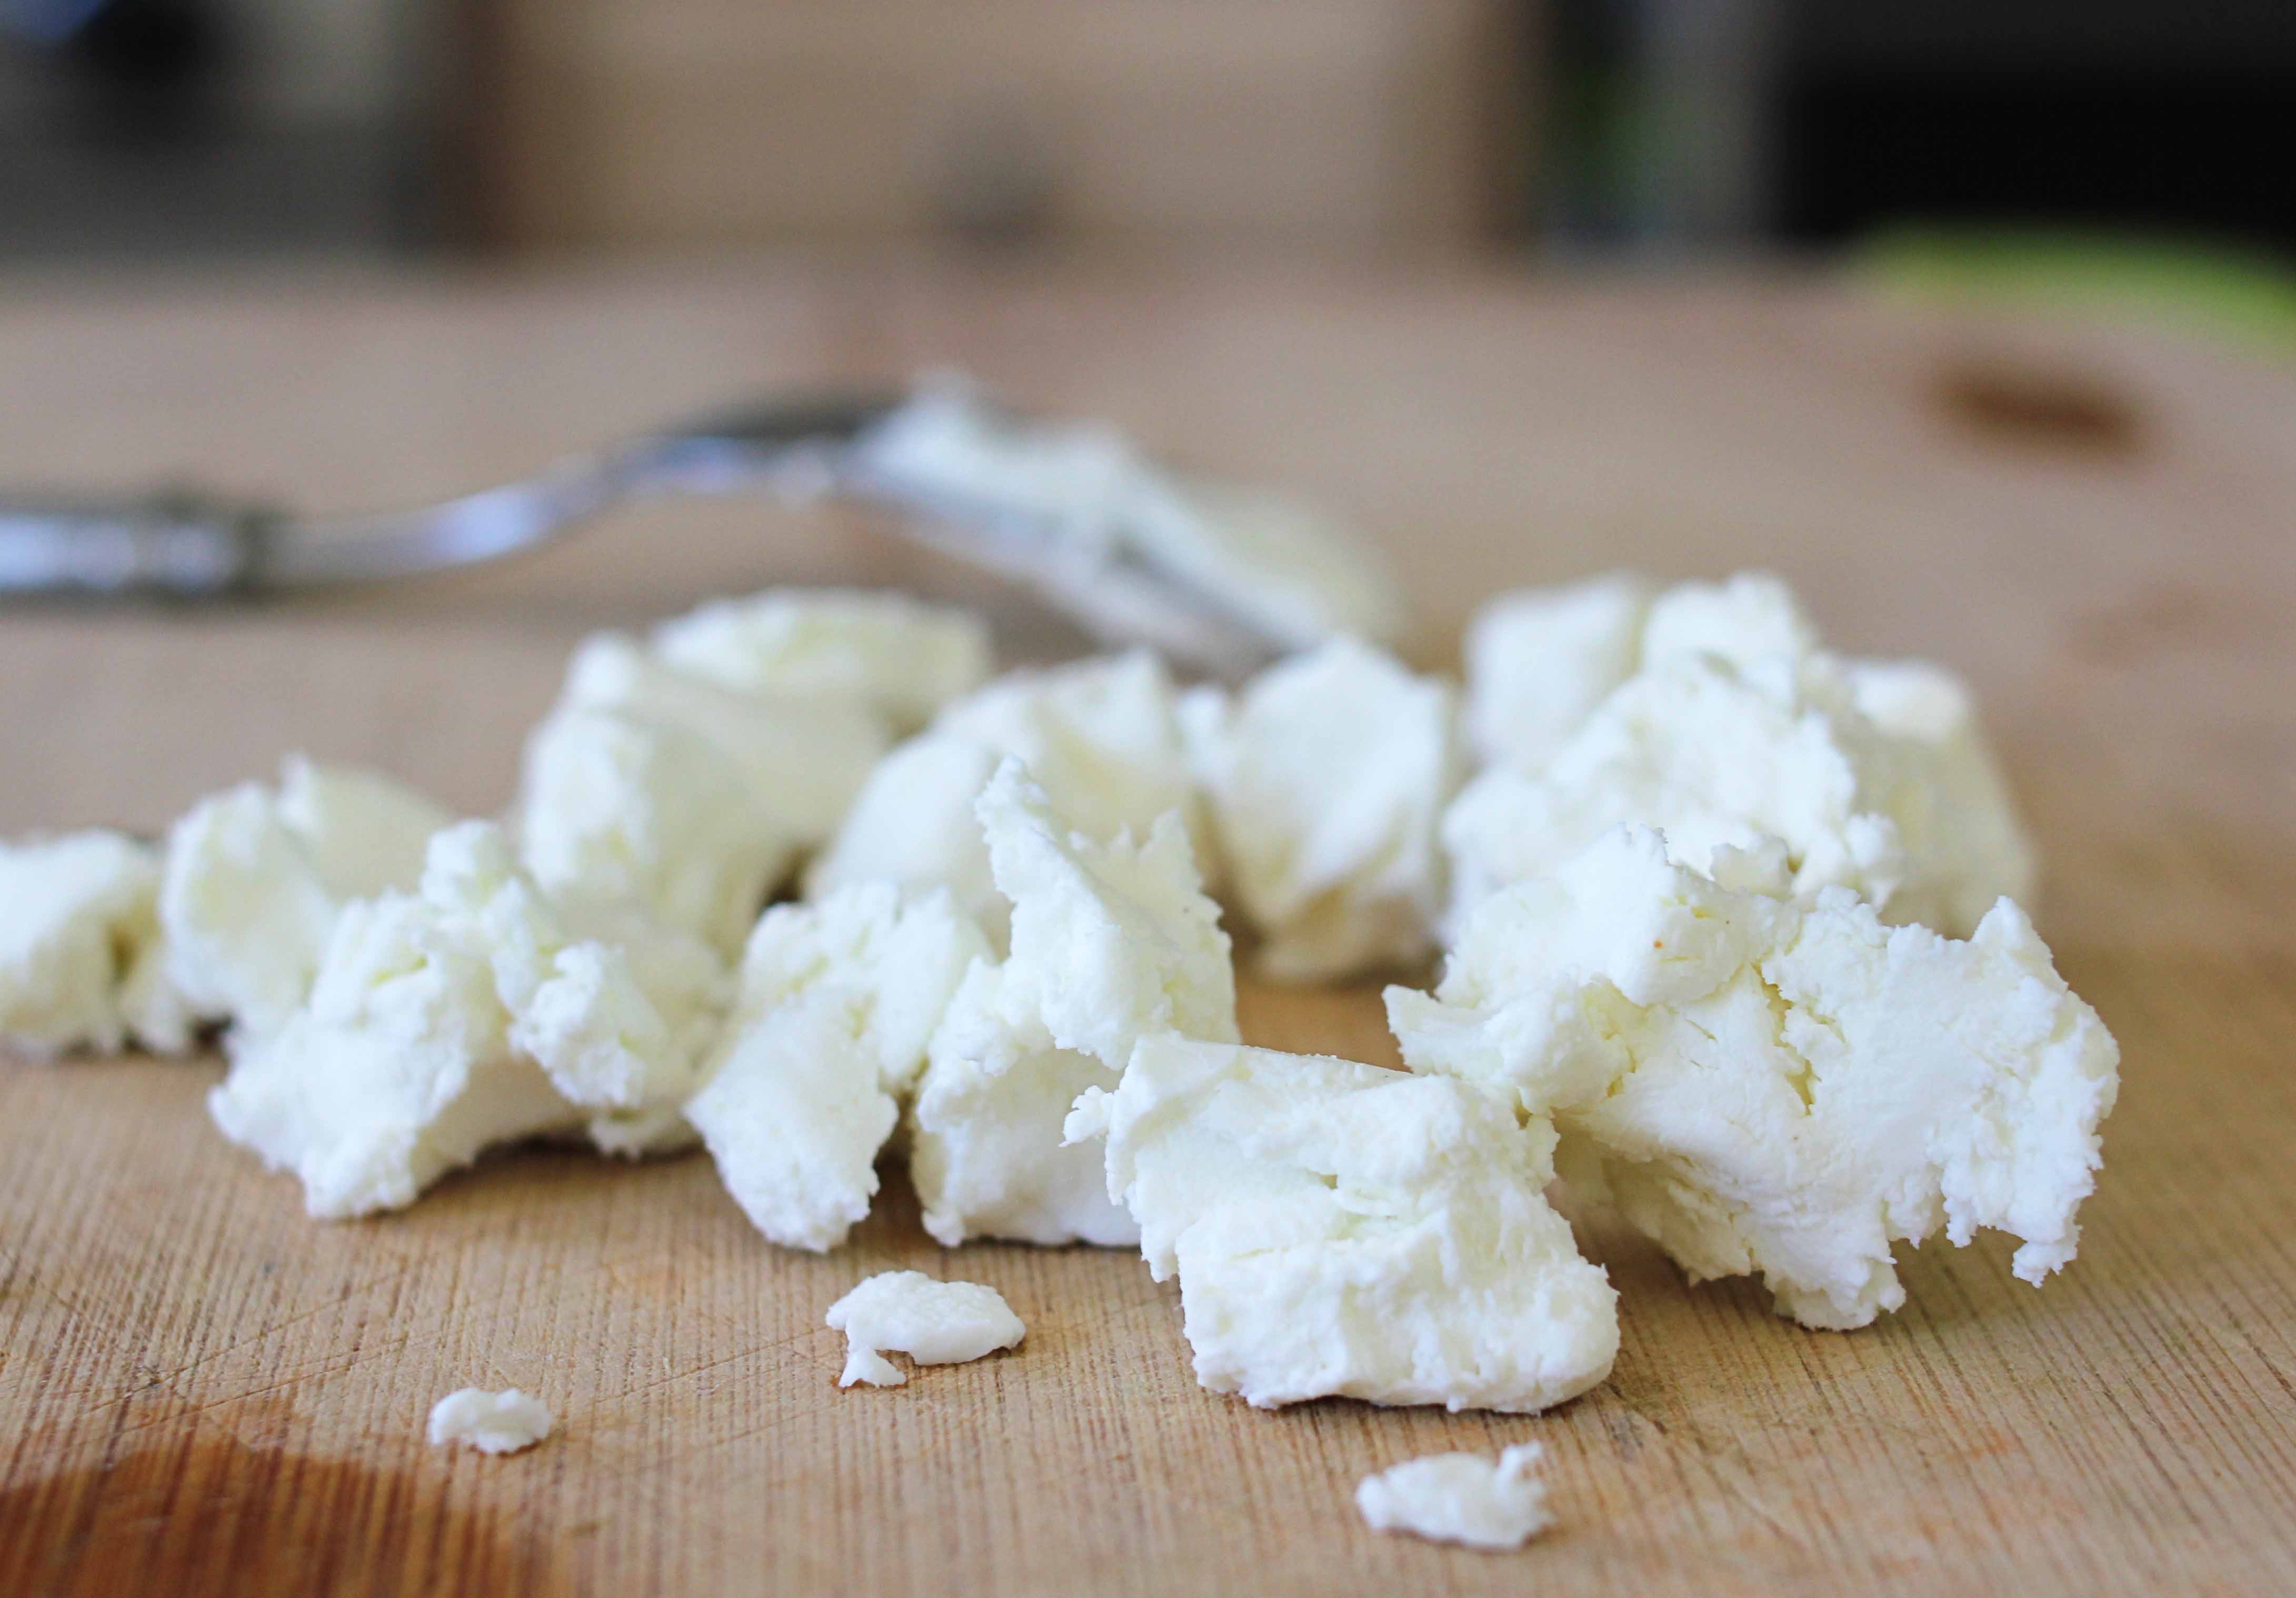 Study catalogs the complex flavors of American made goat cheese